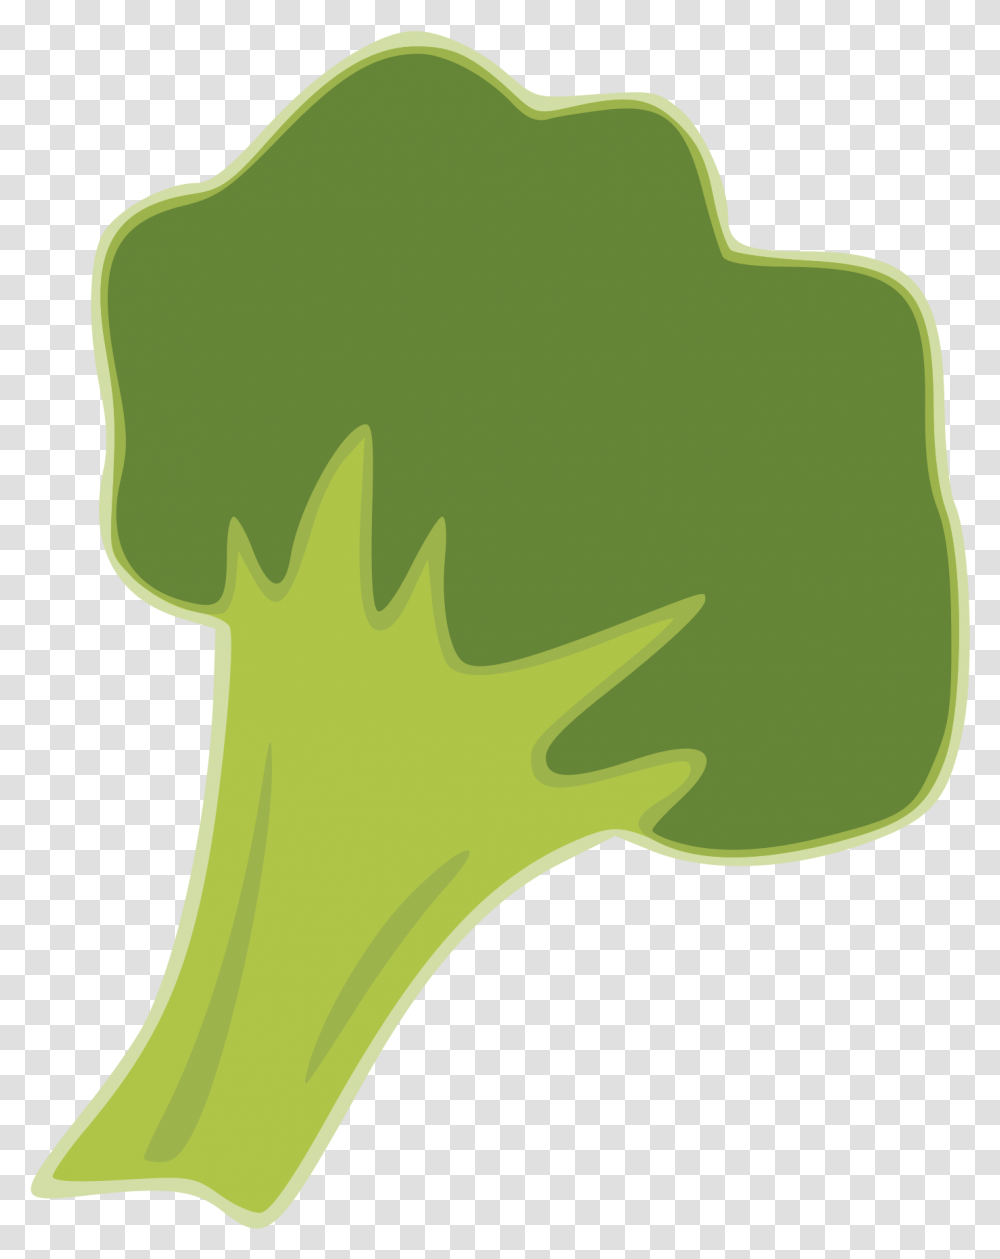 Grassyellowhand Clipart Broccoli, Plant, Vegetable, Food, Axe Transparent Png